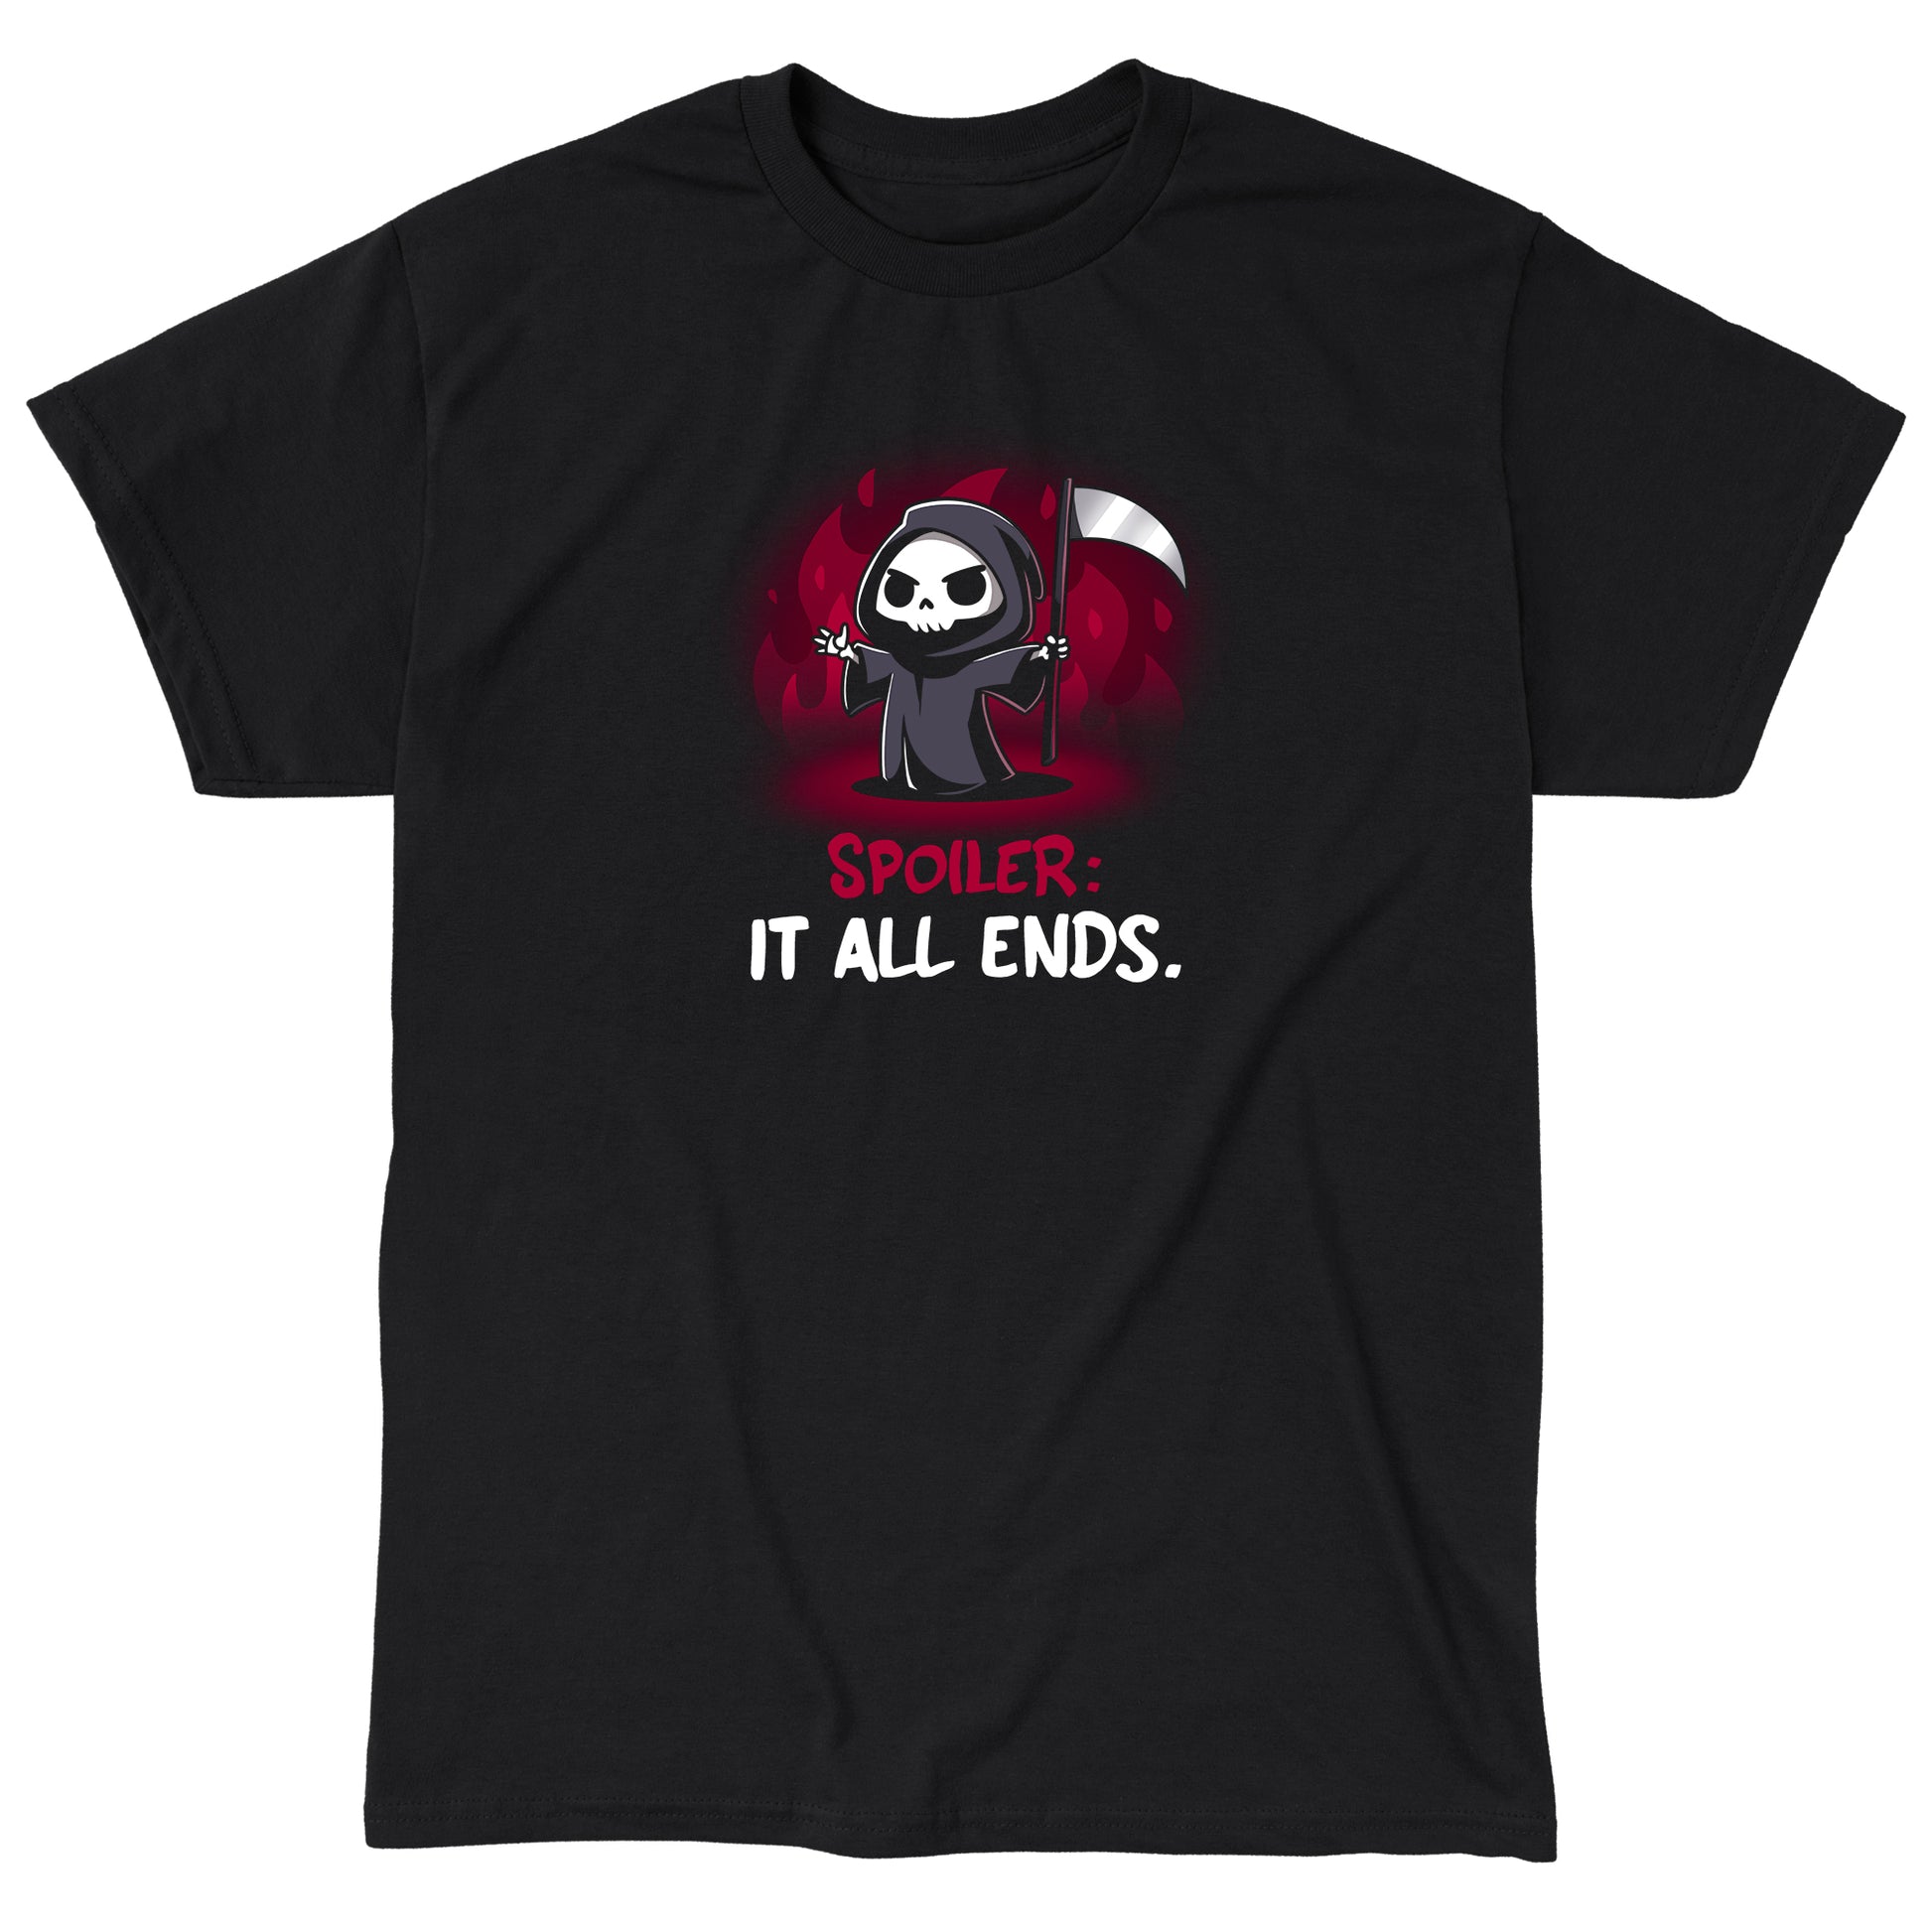 Classic Cotton T-shirt_TeeTurtle Spoiler: It All Ends. black t-shirt featuring a dark and dangerous Grim Reaper in front of red flames.